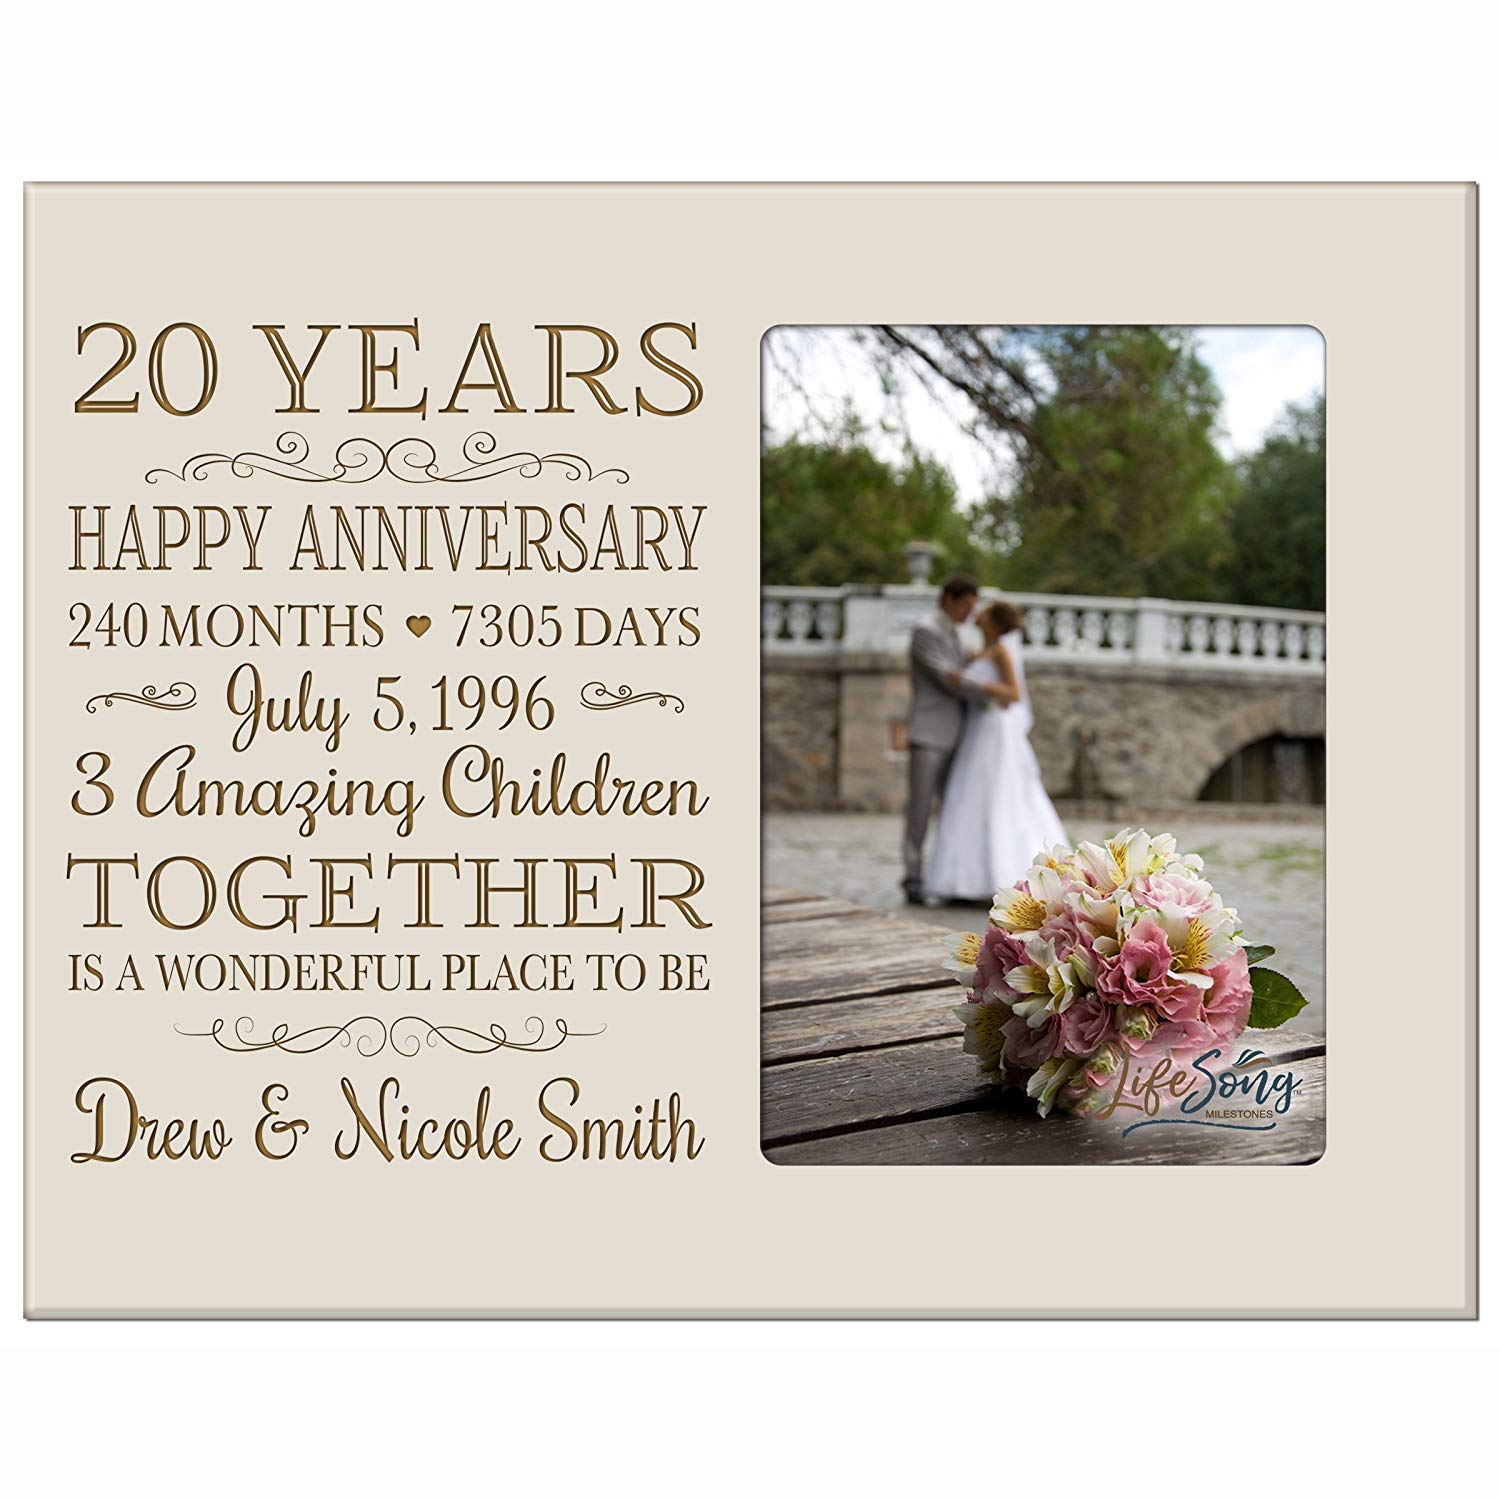 Lifesong Milestones Personalized Unique 20th Wedding Anniversary Picture Frame for Couples